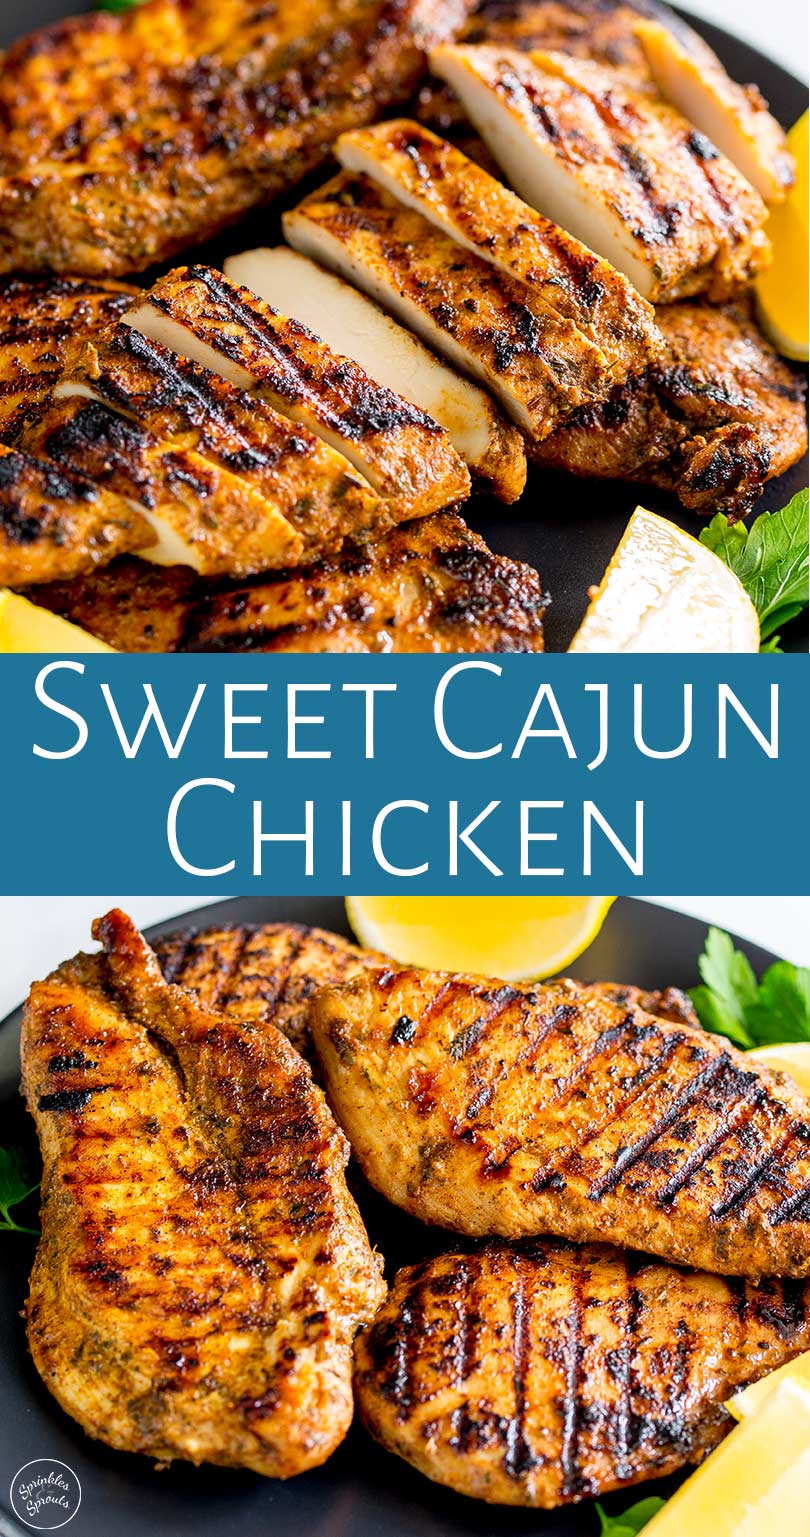 two pictures of cajun chicken with text in a teal box